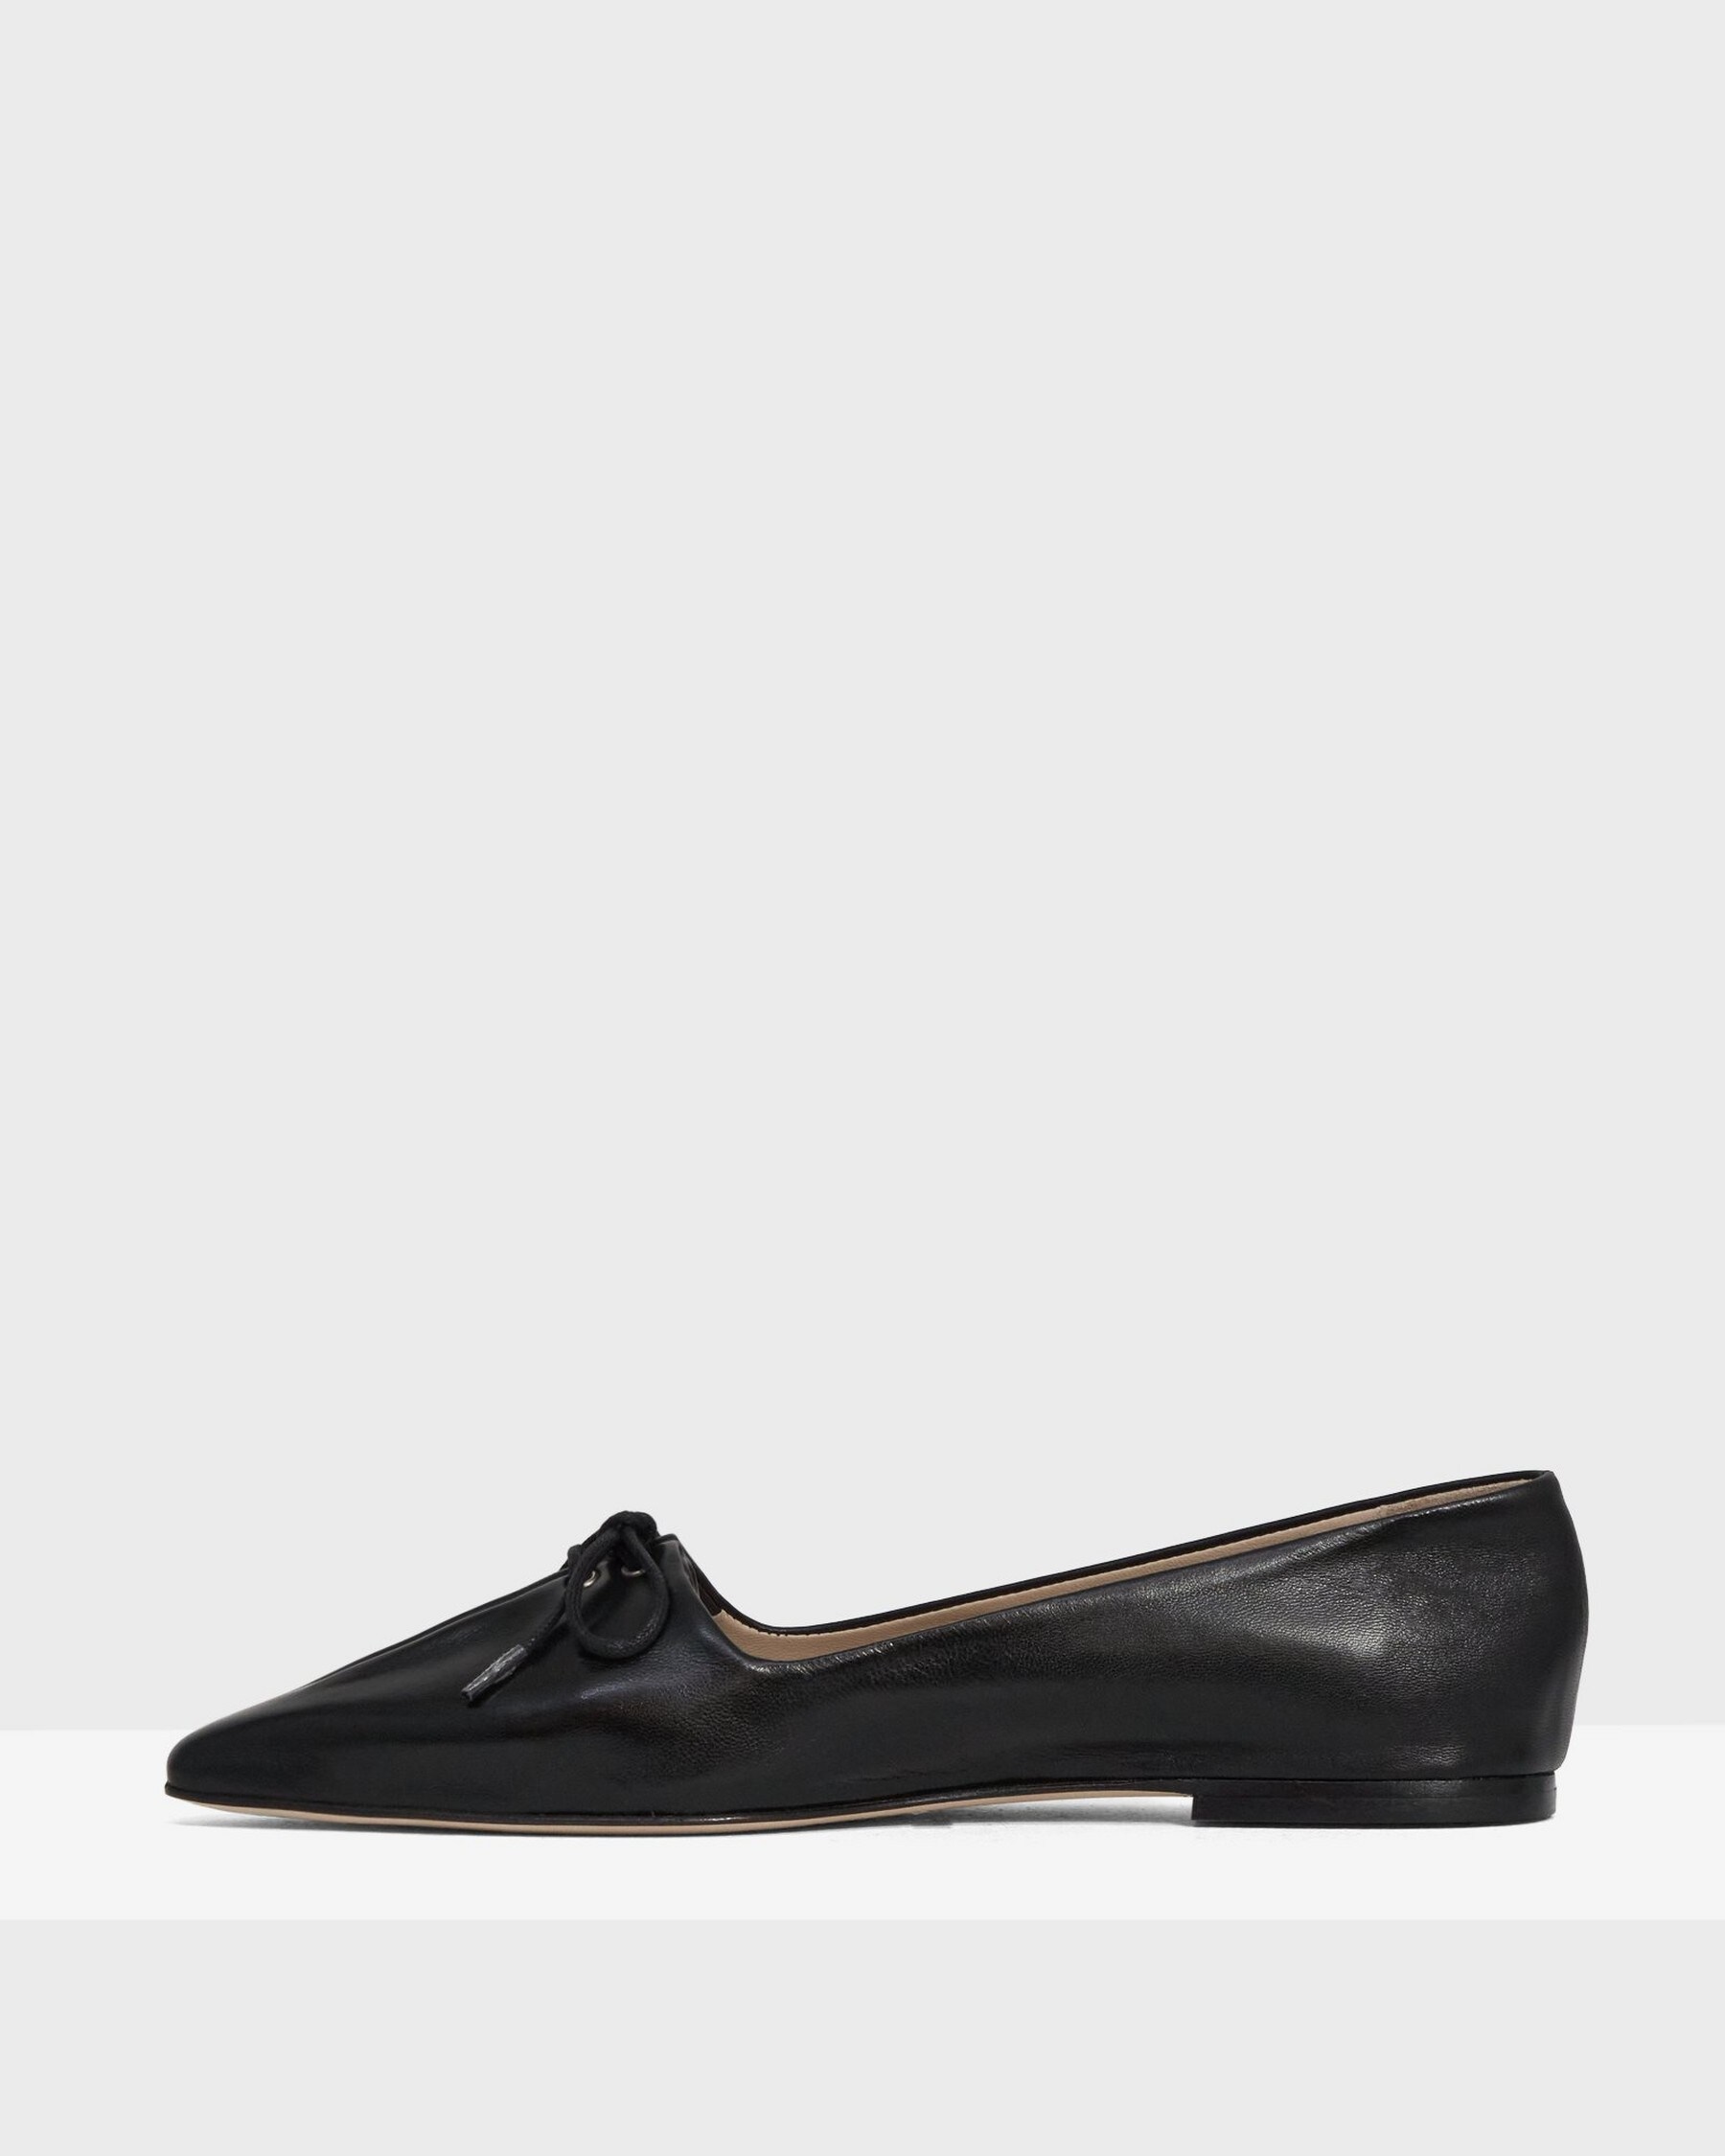 Pleated Ballet Flat in Leather